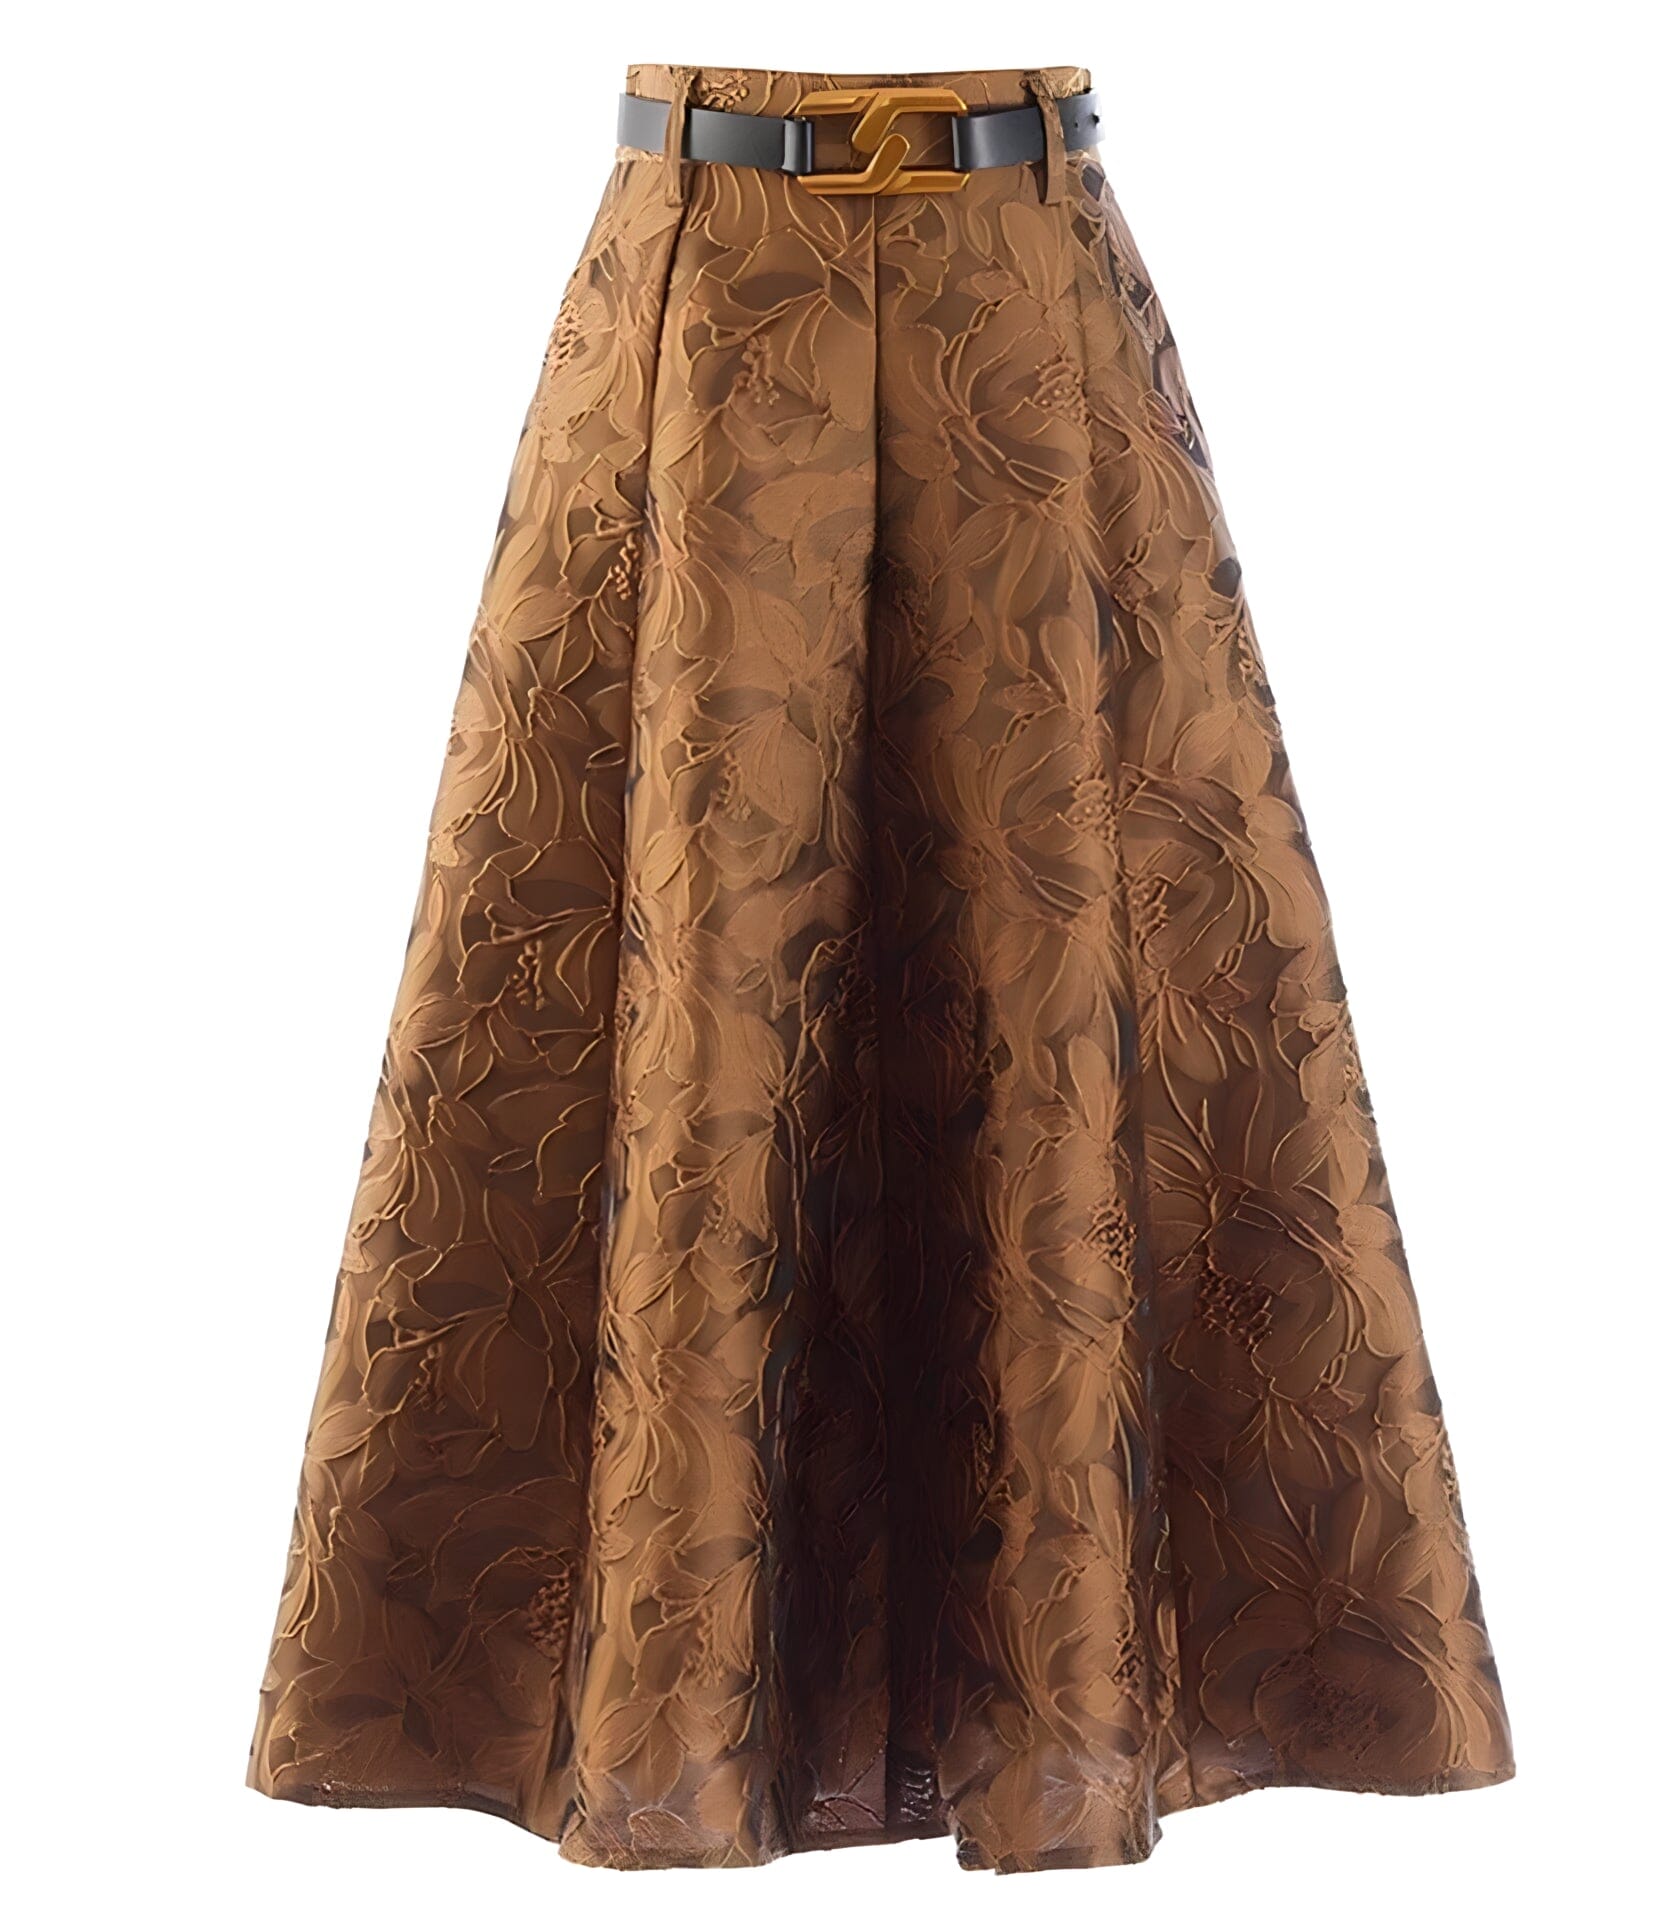 The October High Waist Skirt - Multiple Colors 0 SA Styles Coffee S 